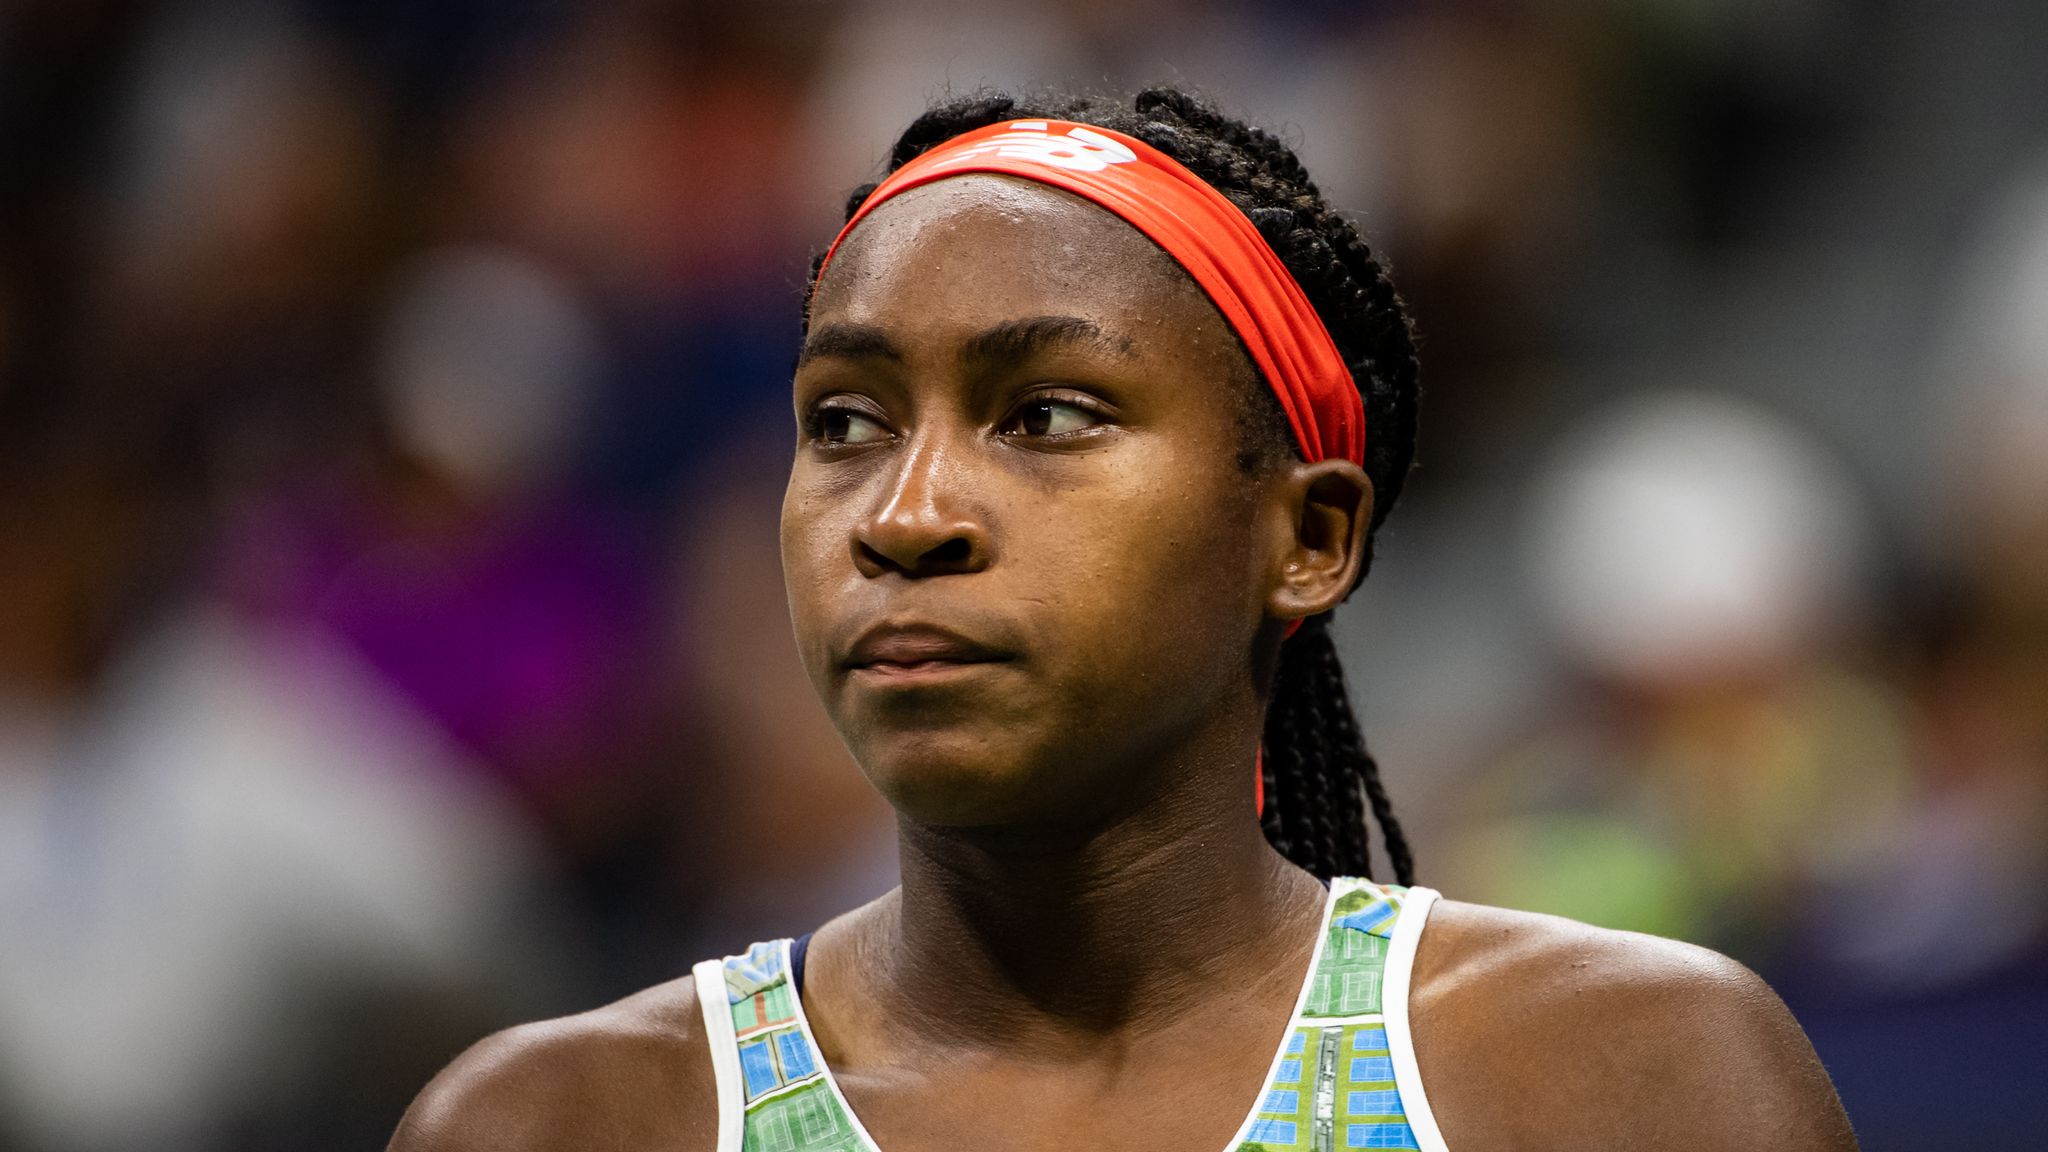 Coco Gauff reveals she struggled with depression due to pressures earlier  in career | Tennis News | Sky Sports